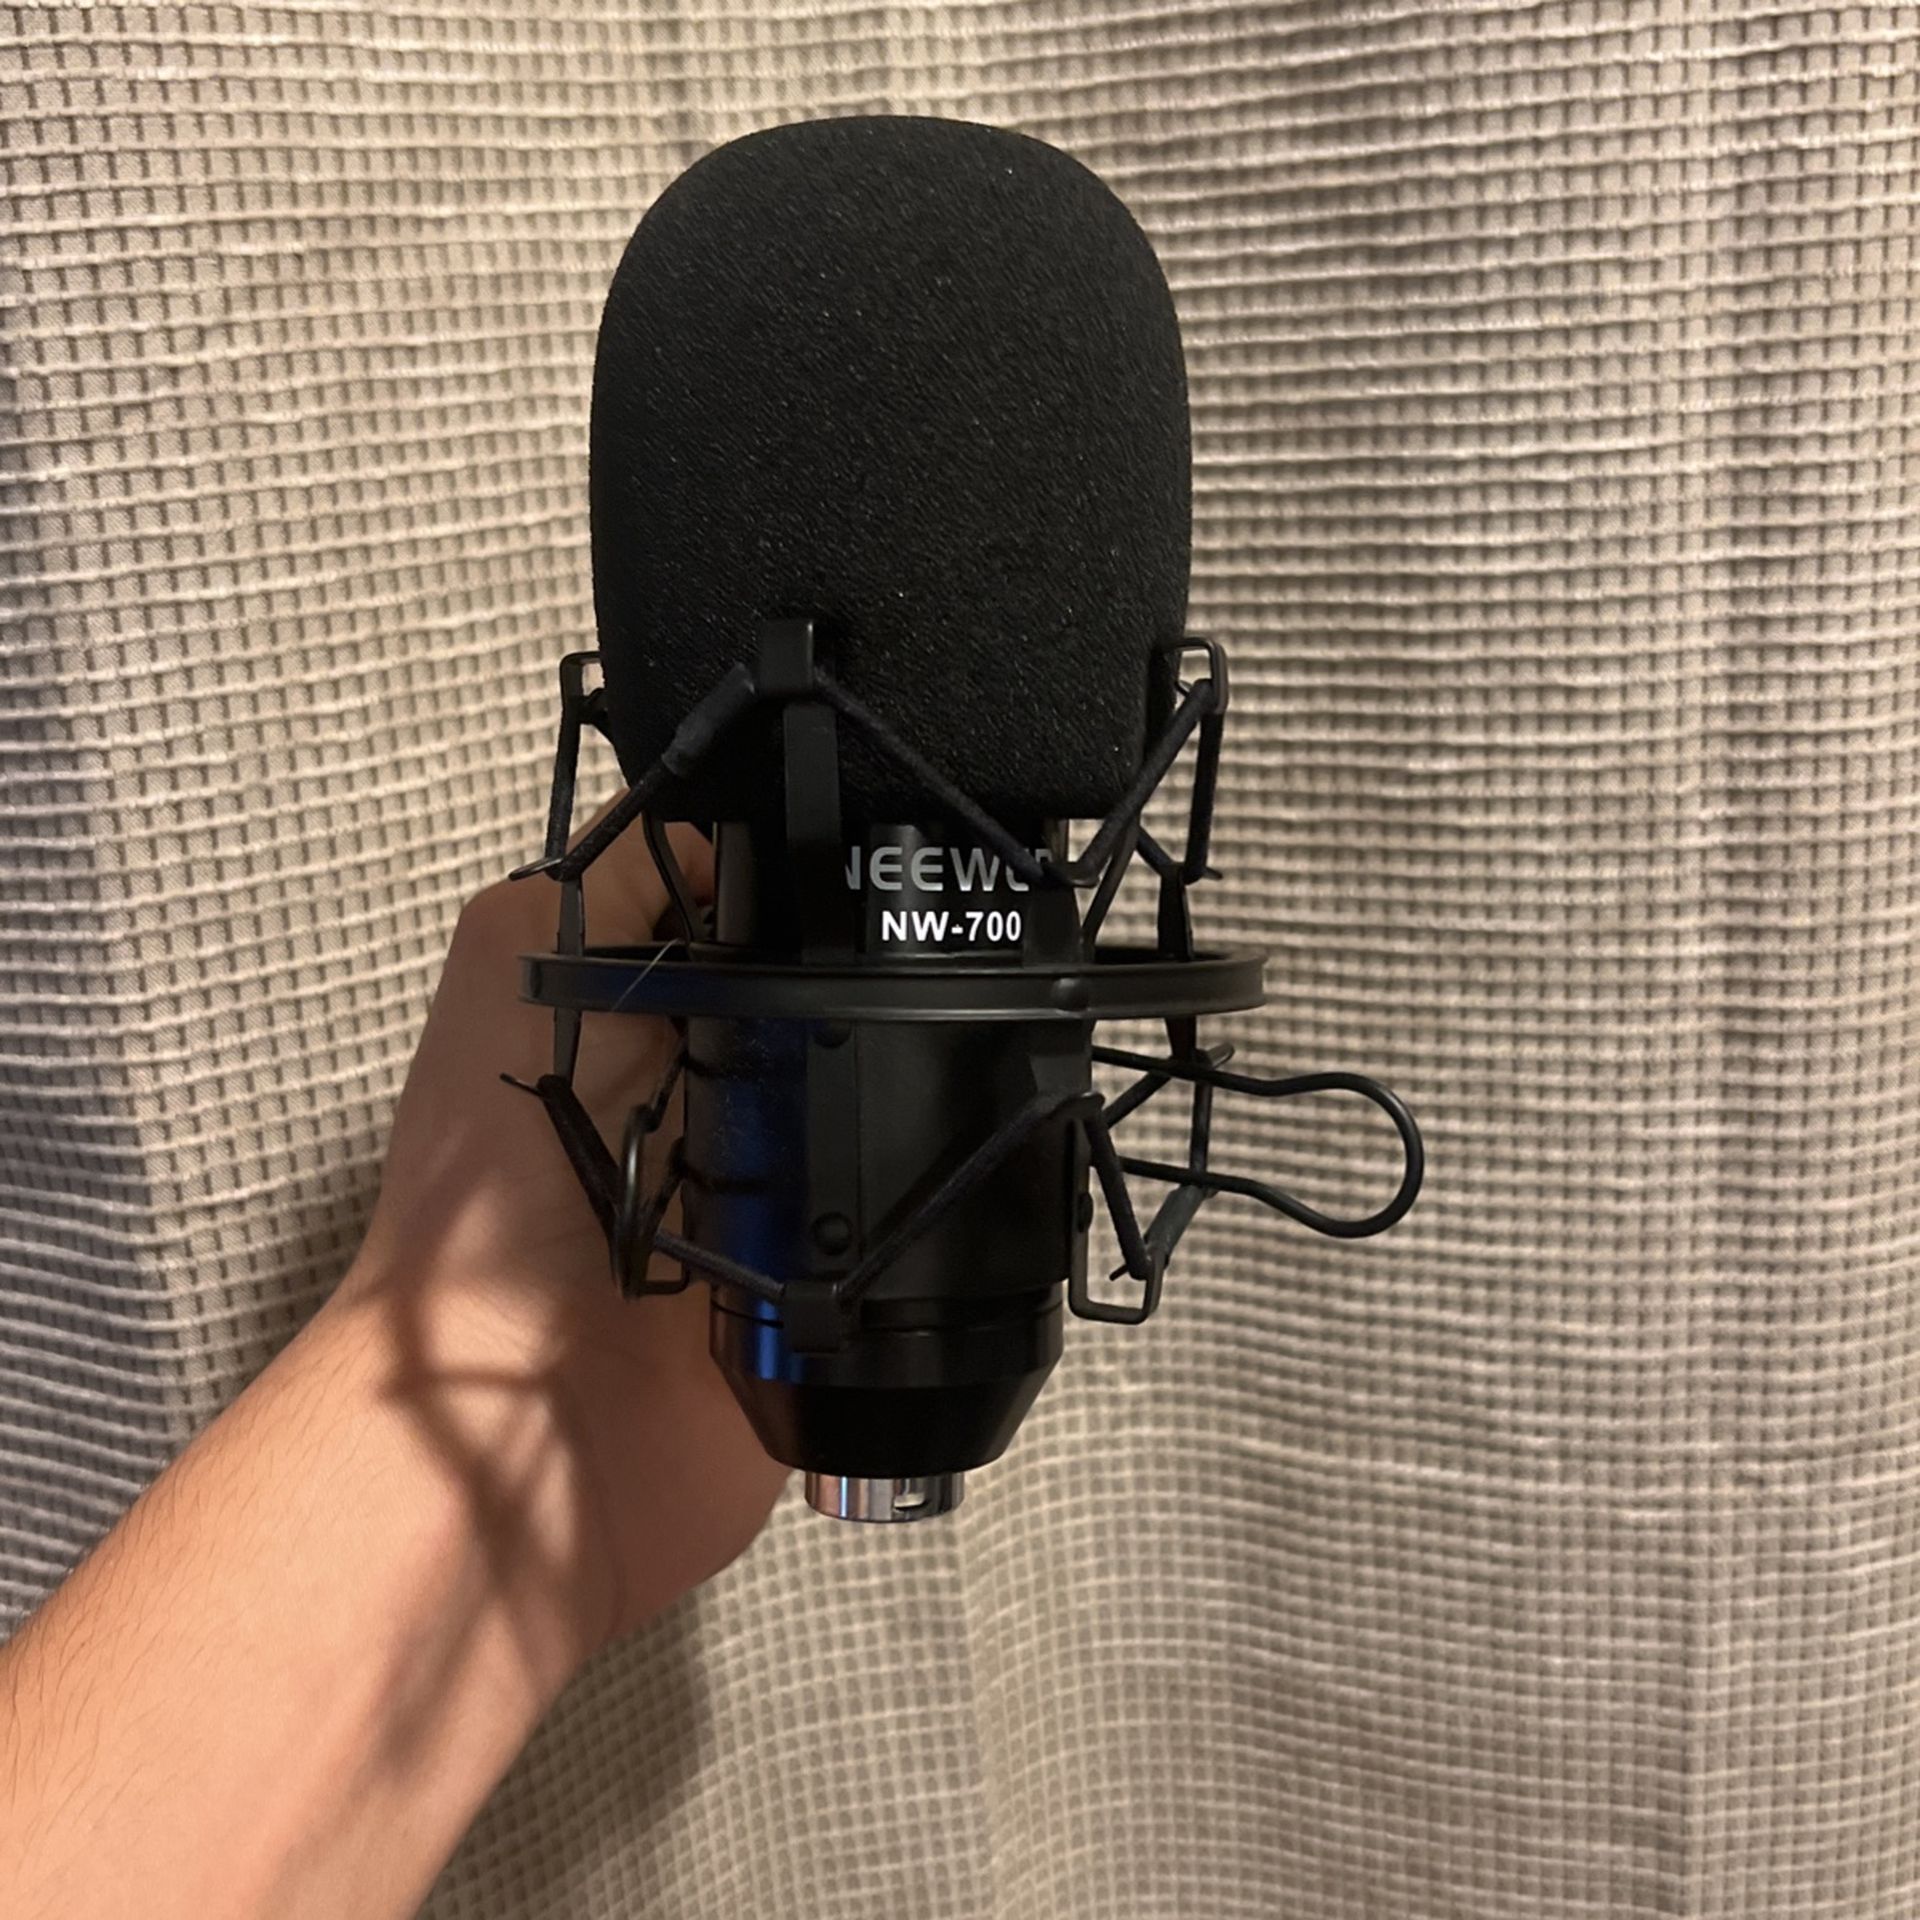 Neewer Nw-700 Microphone With Cables And Mix Amp